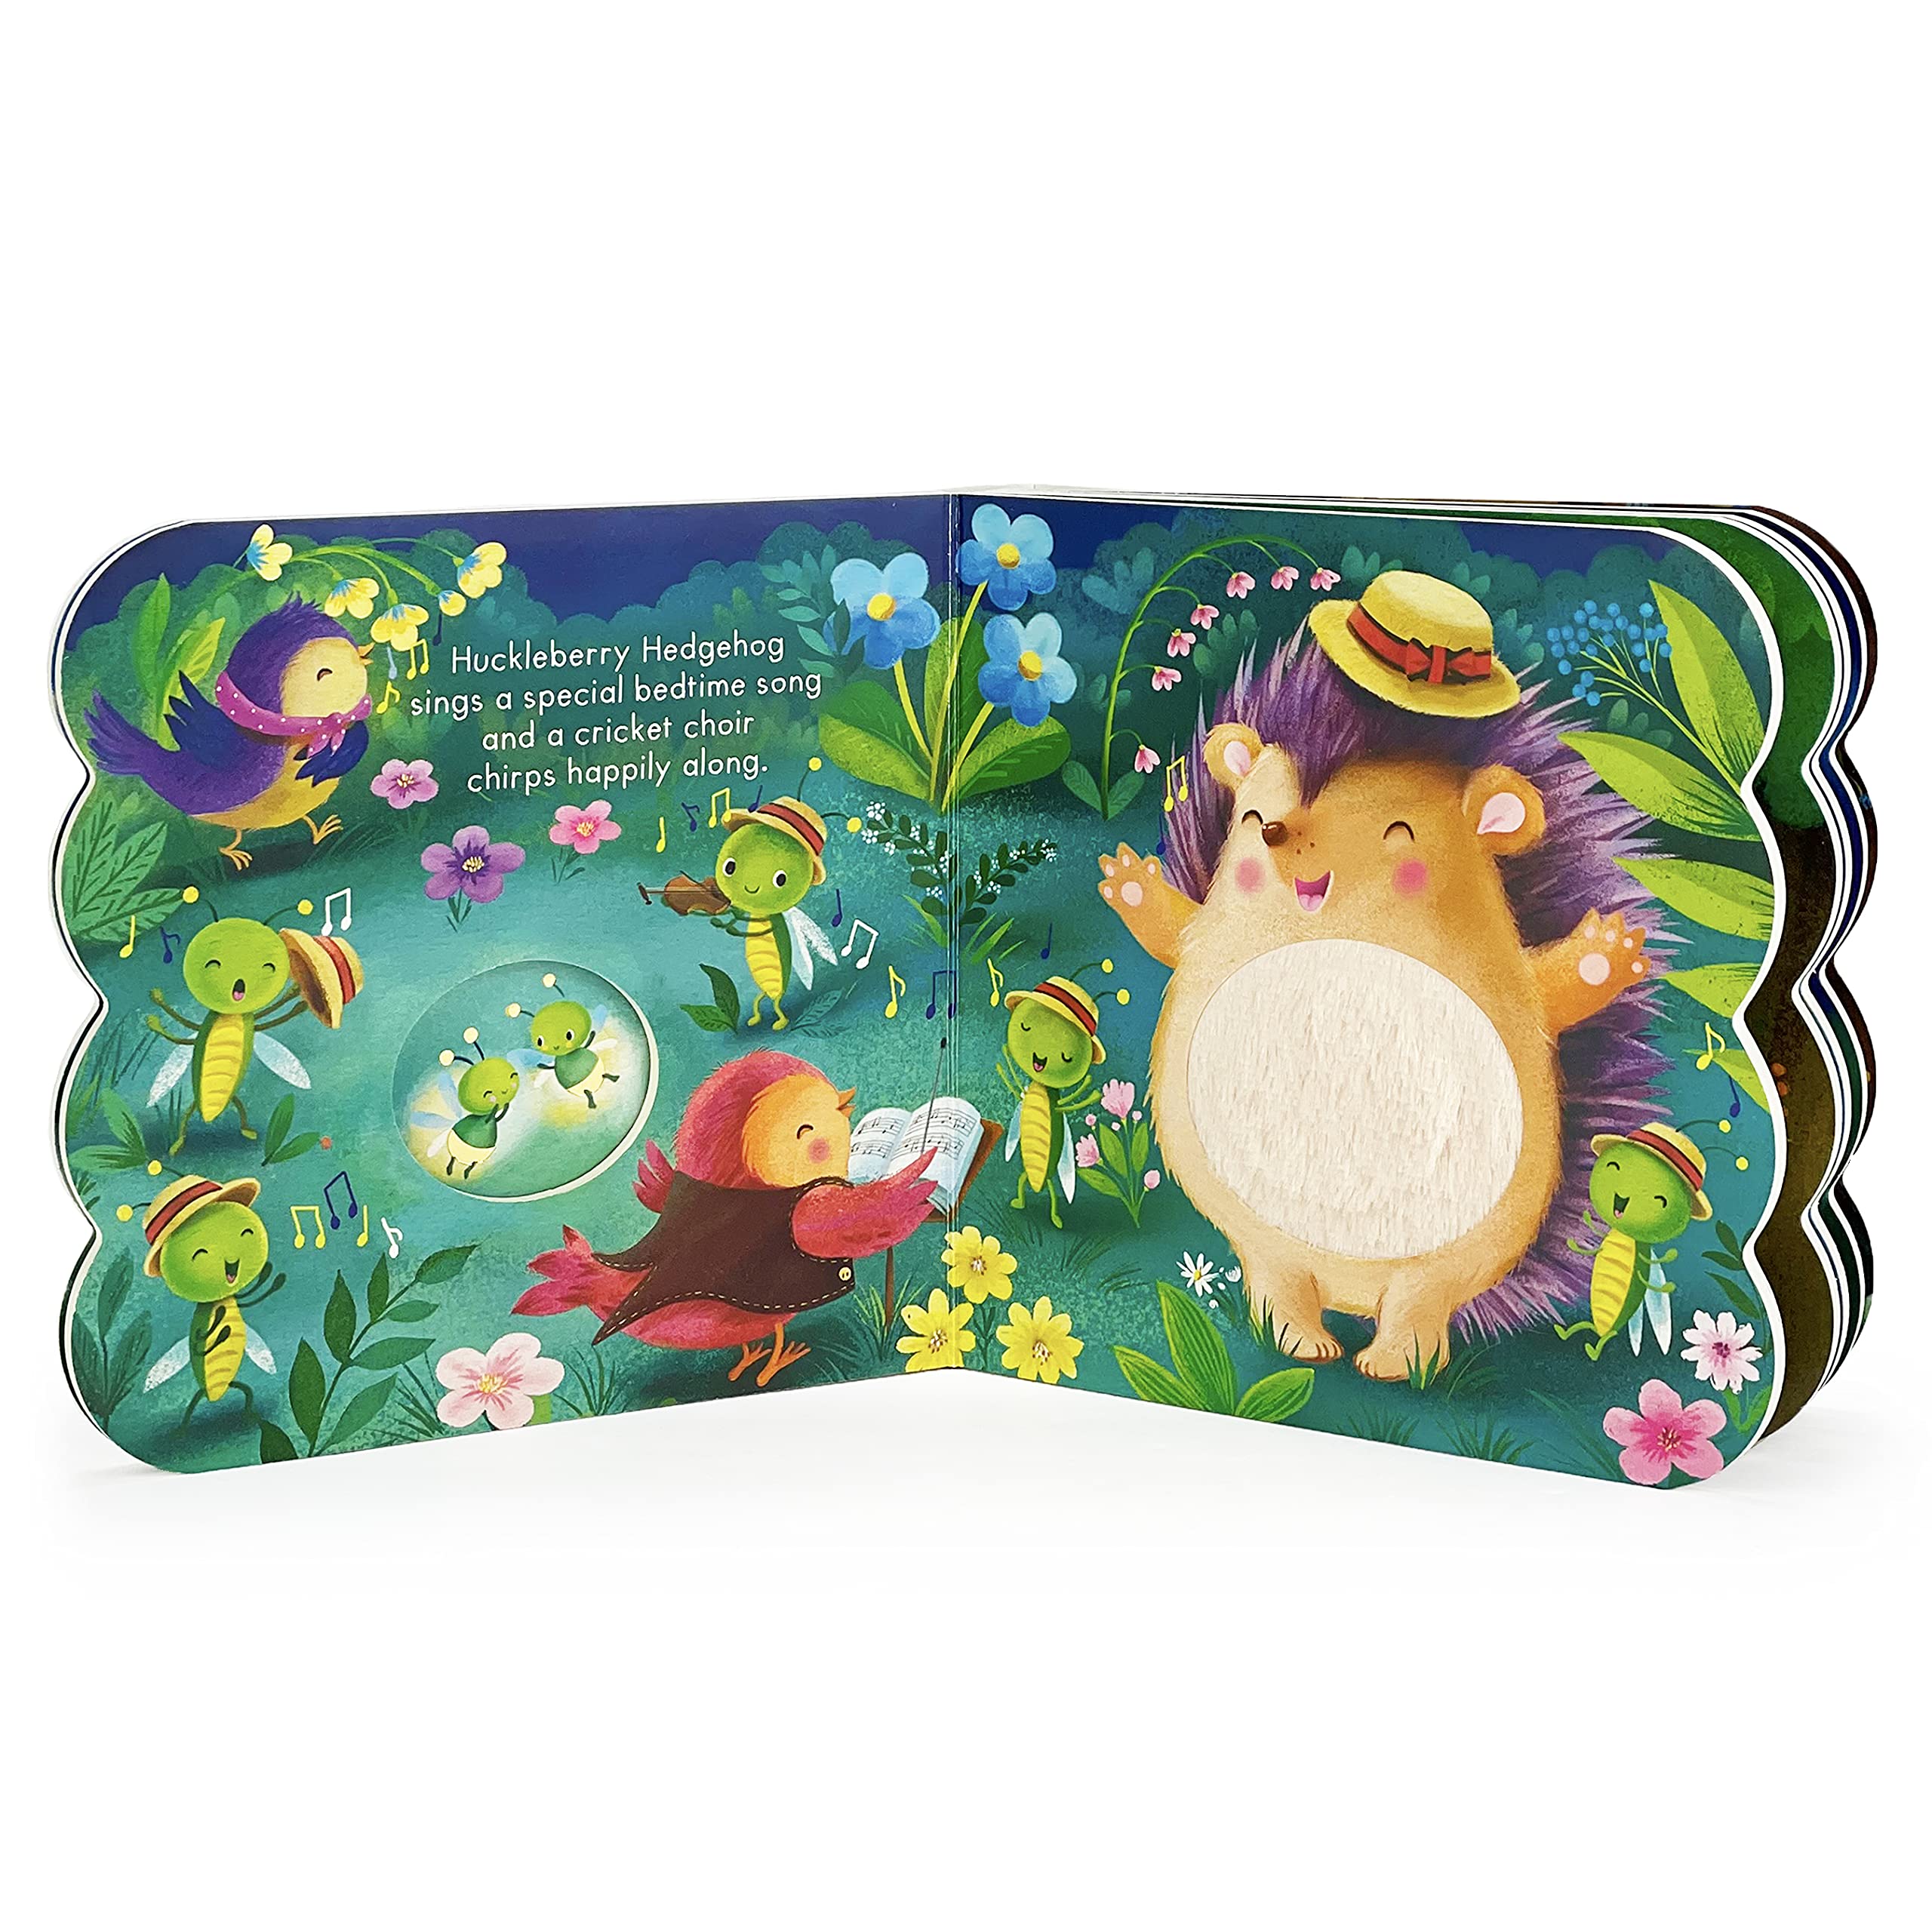 Touch & Feel: Good Night, Cuddlebug Lane: Baby & Toddler Touch and Feel Sensory Board Book